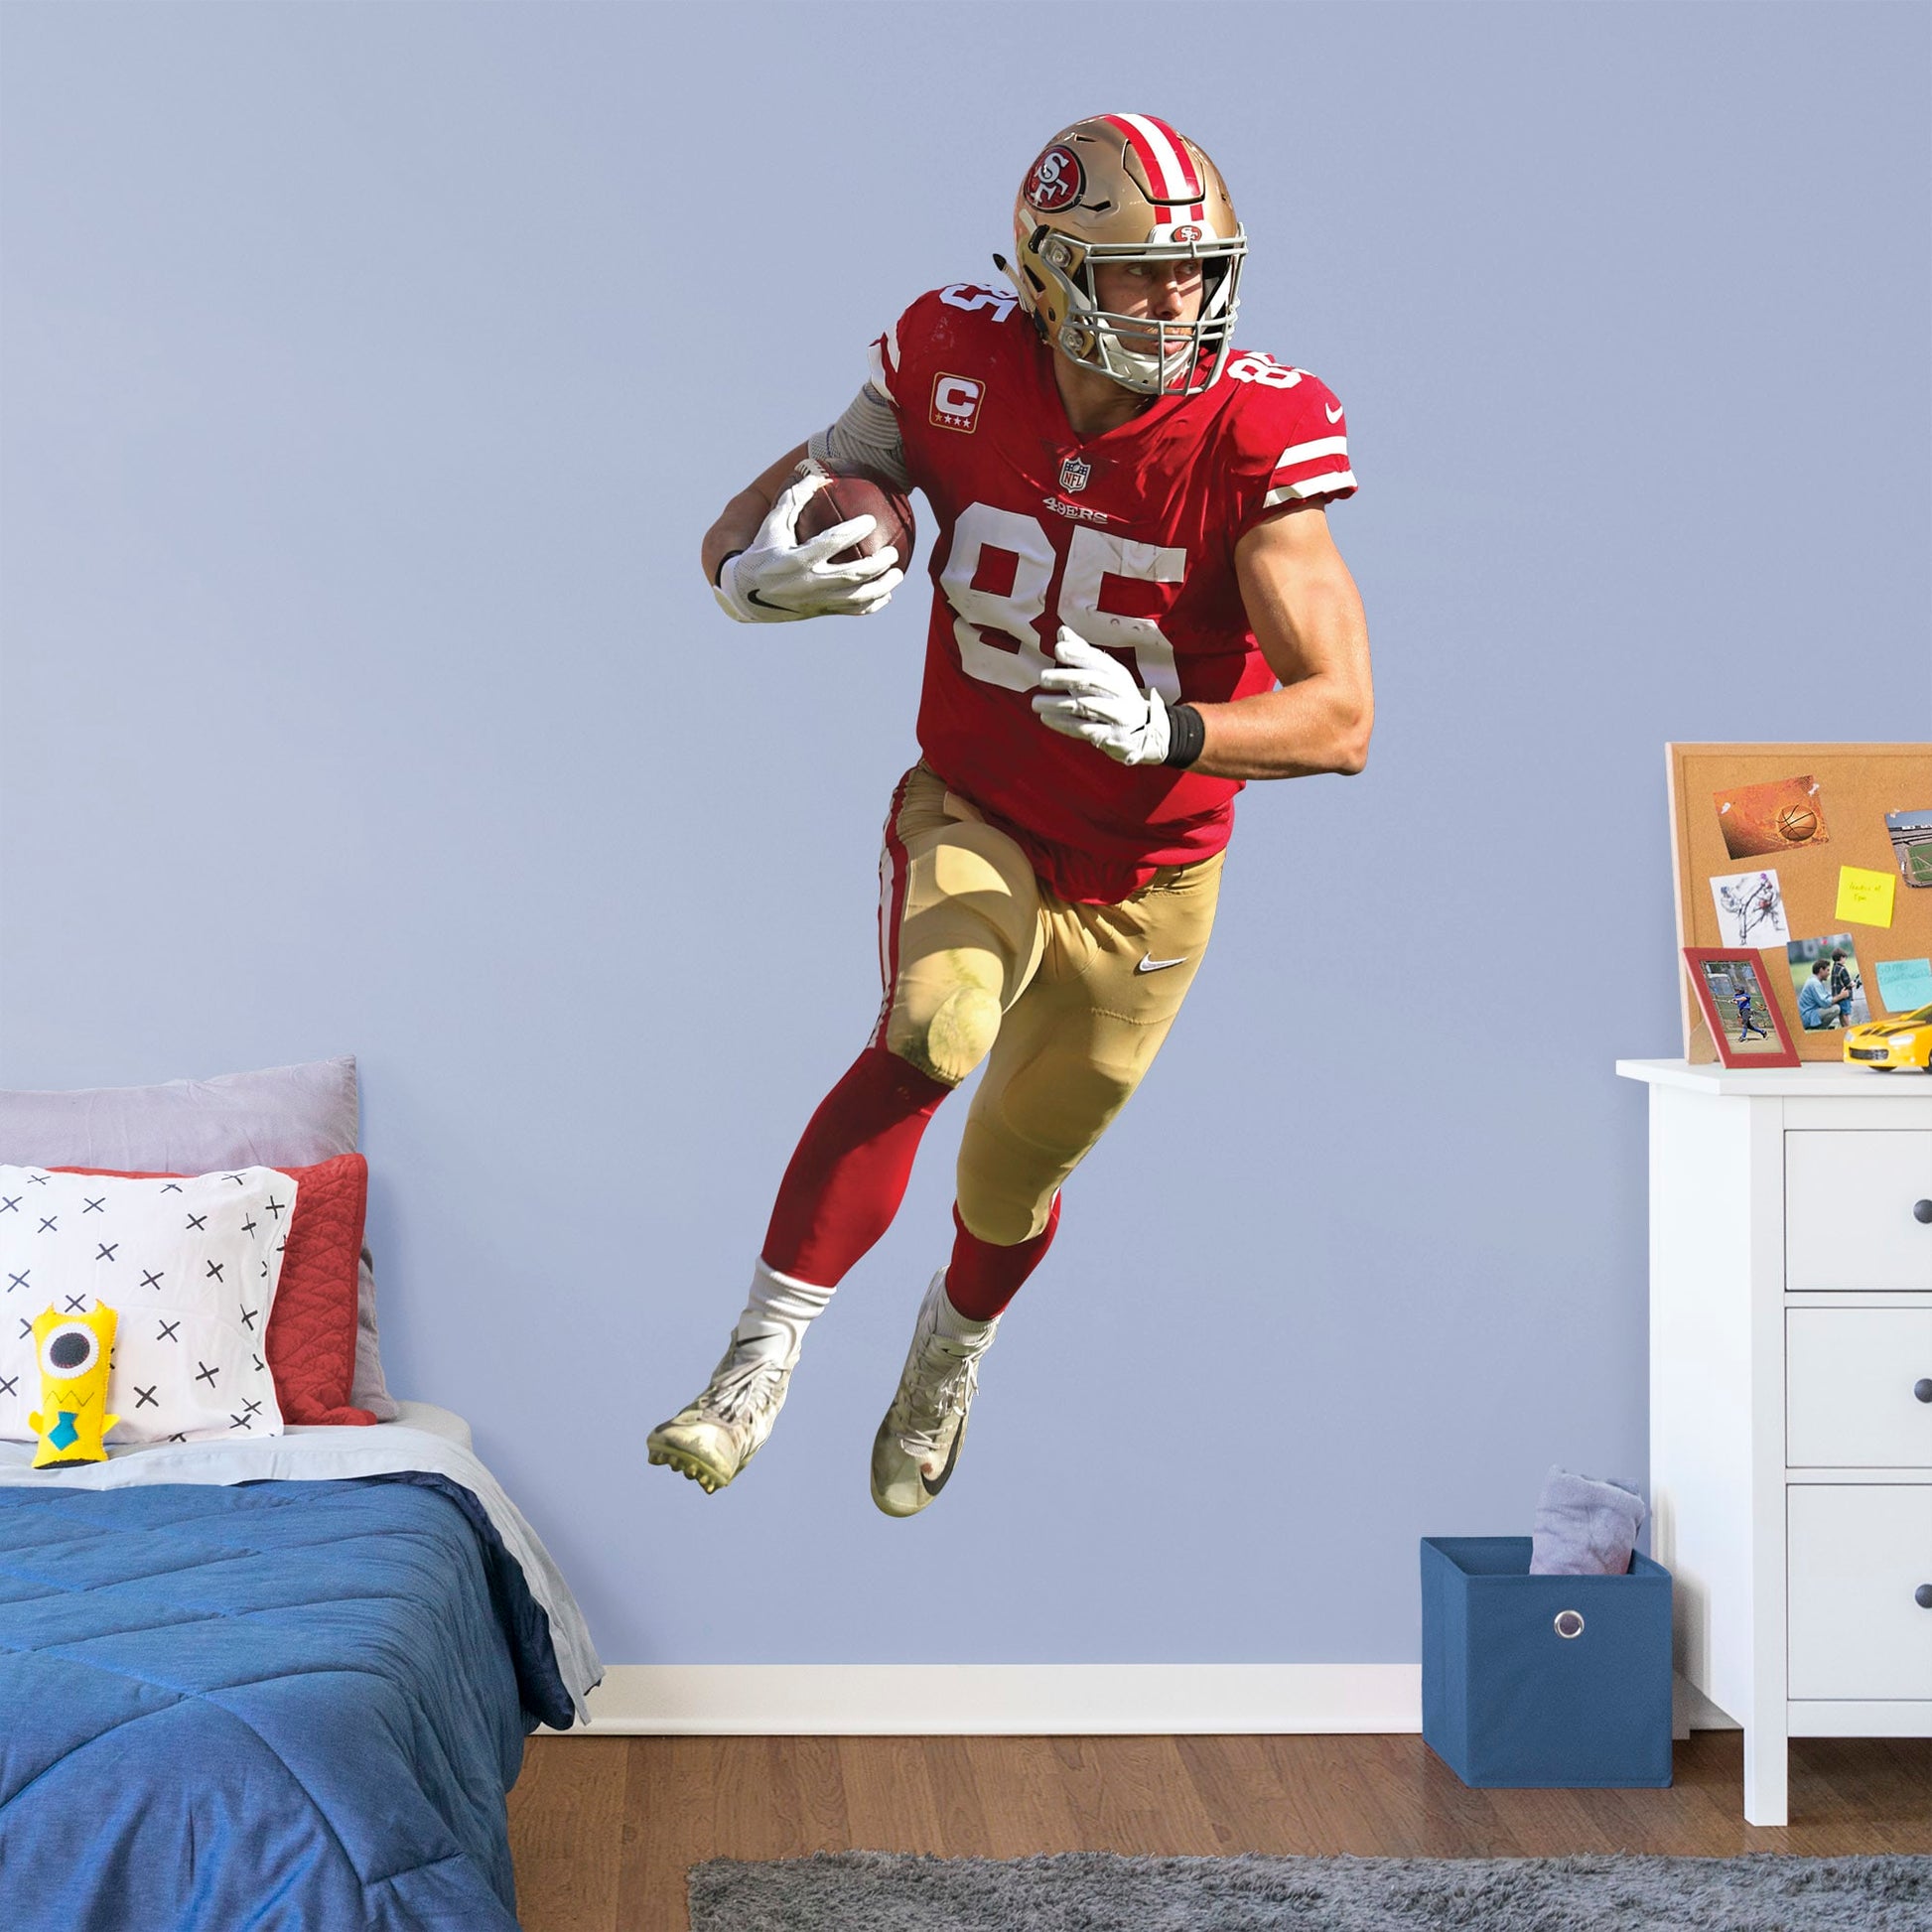 Customer-made Football Player Kids Personalized Any Name Bedroom Wall decal  decoration Art Mural Decal Sticker-You Choose Name